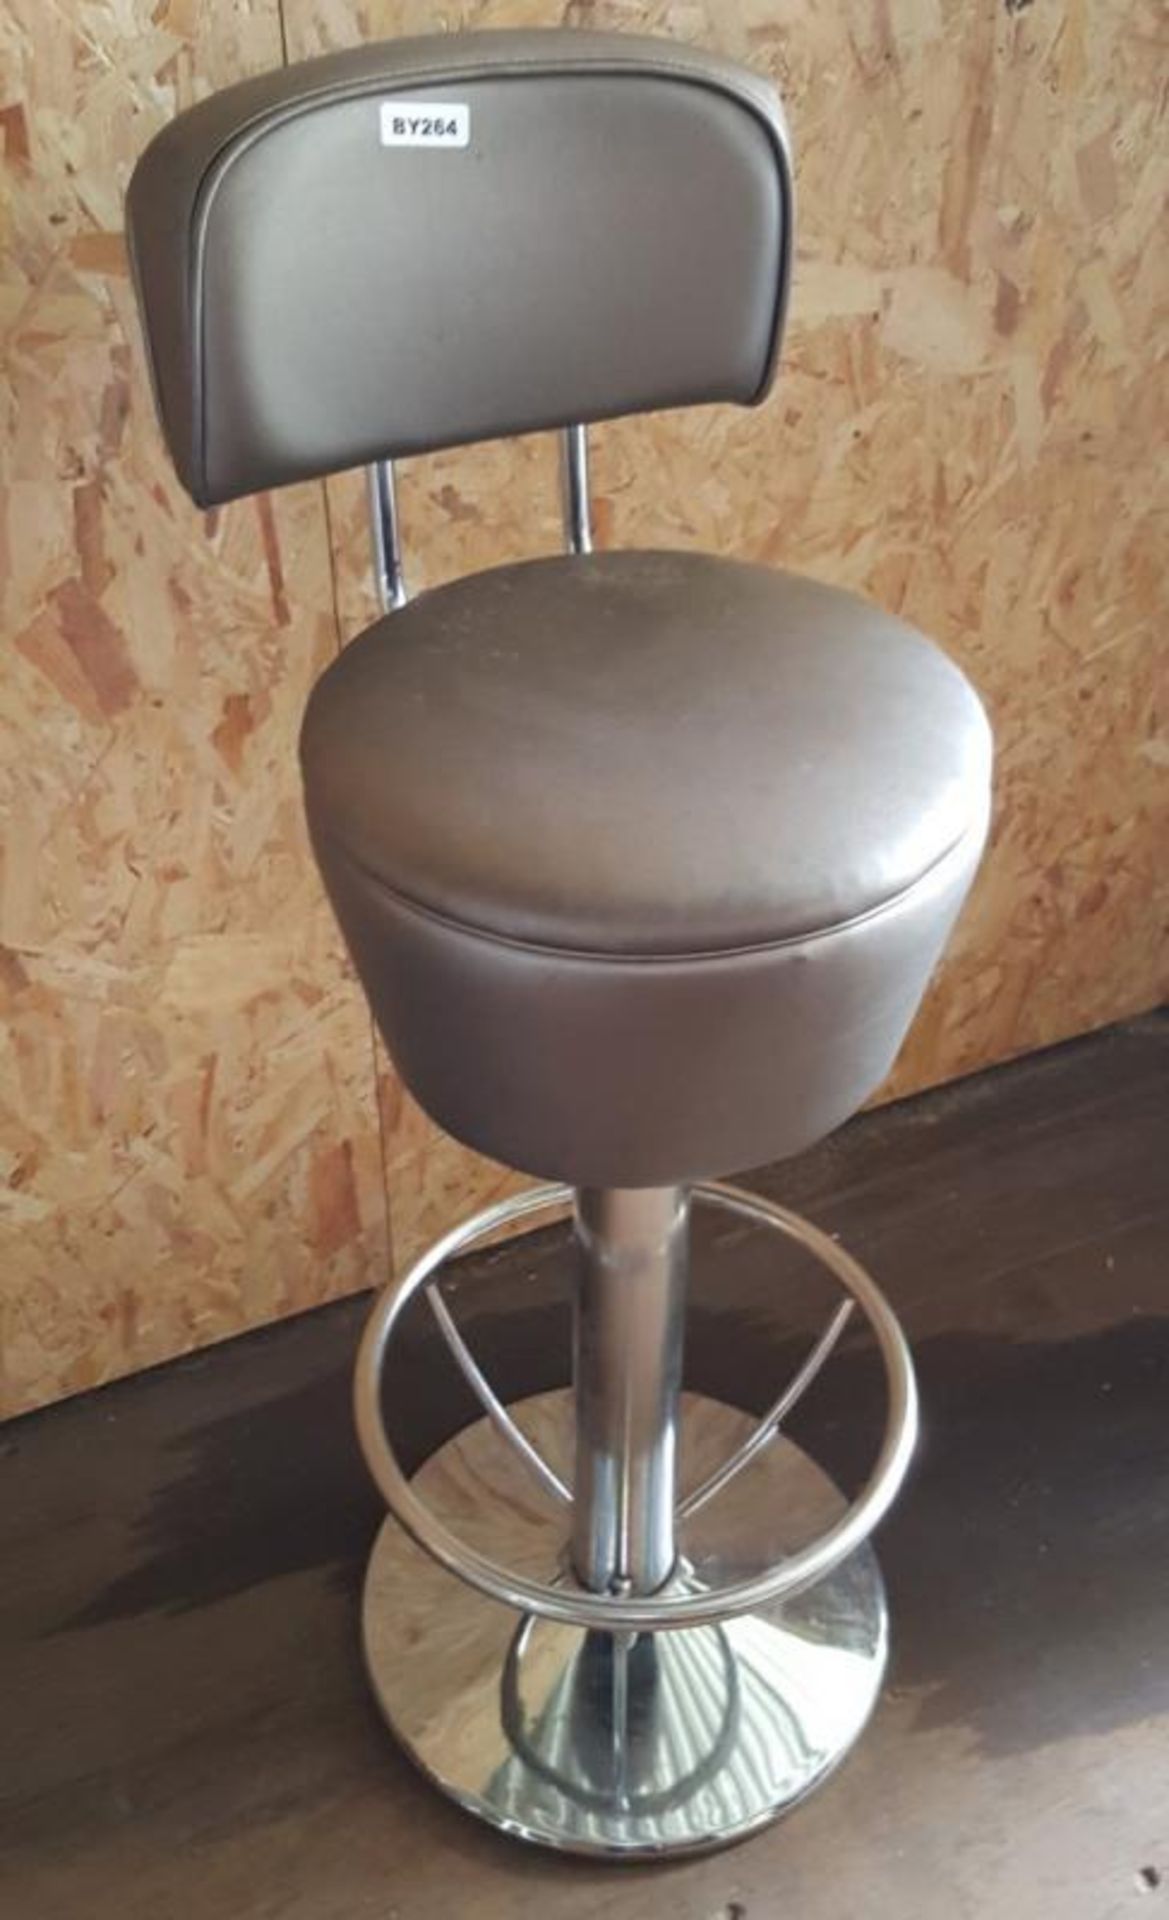 A Set Of 3 Bespoke Chrome Based Bar Stools With Dark Sliver Faux Leather Seat &amp; Back - Ref BY264 - Image 2 of 5